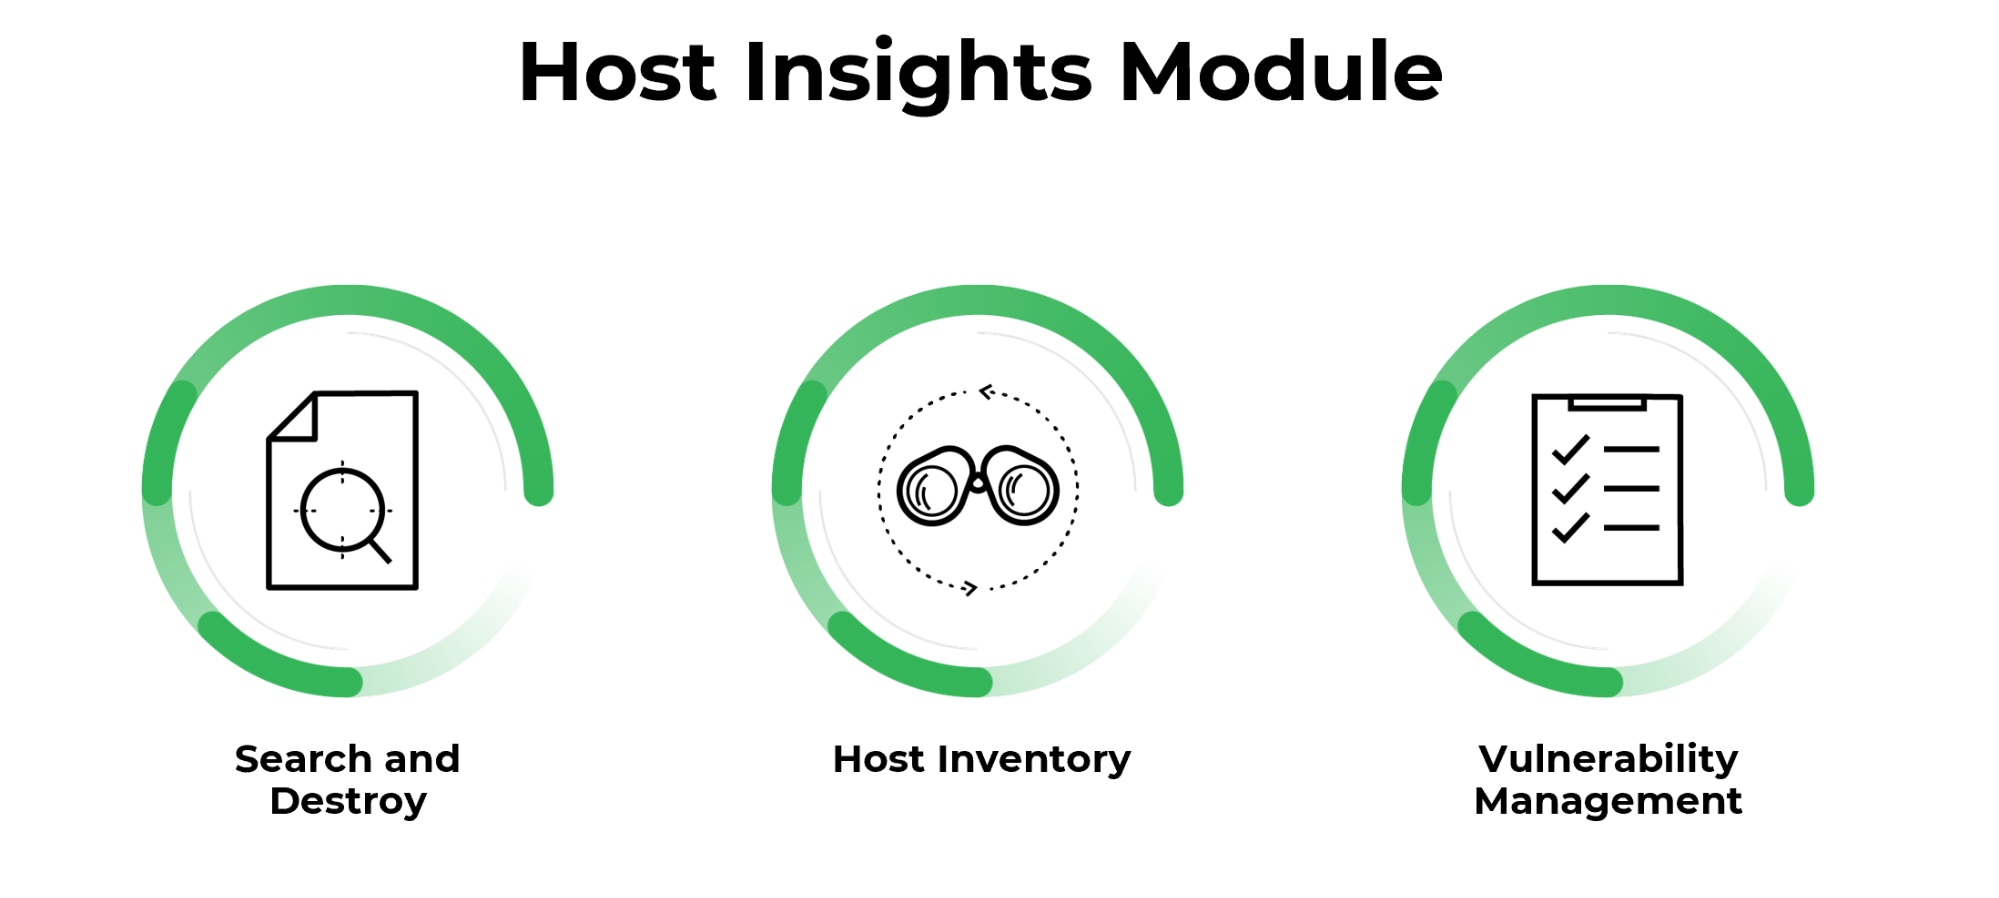 The Host Insights Module in Cortex XDR 2.5 includes features such as Search and Destroy, Host Inventory and Vulnerability Management.